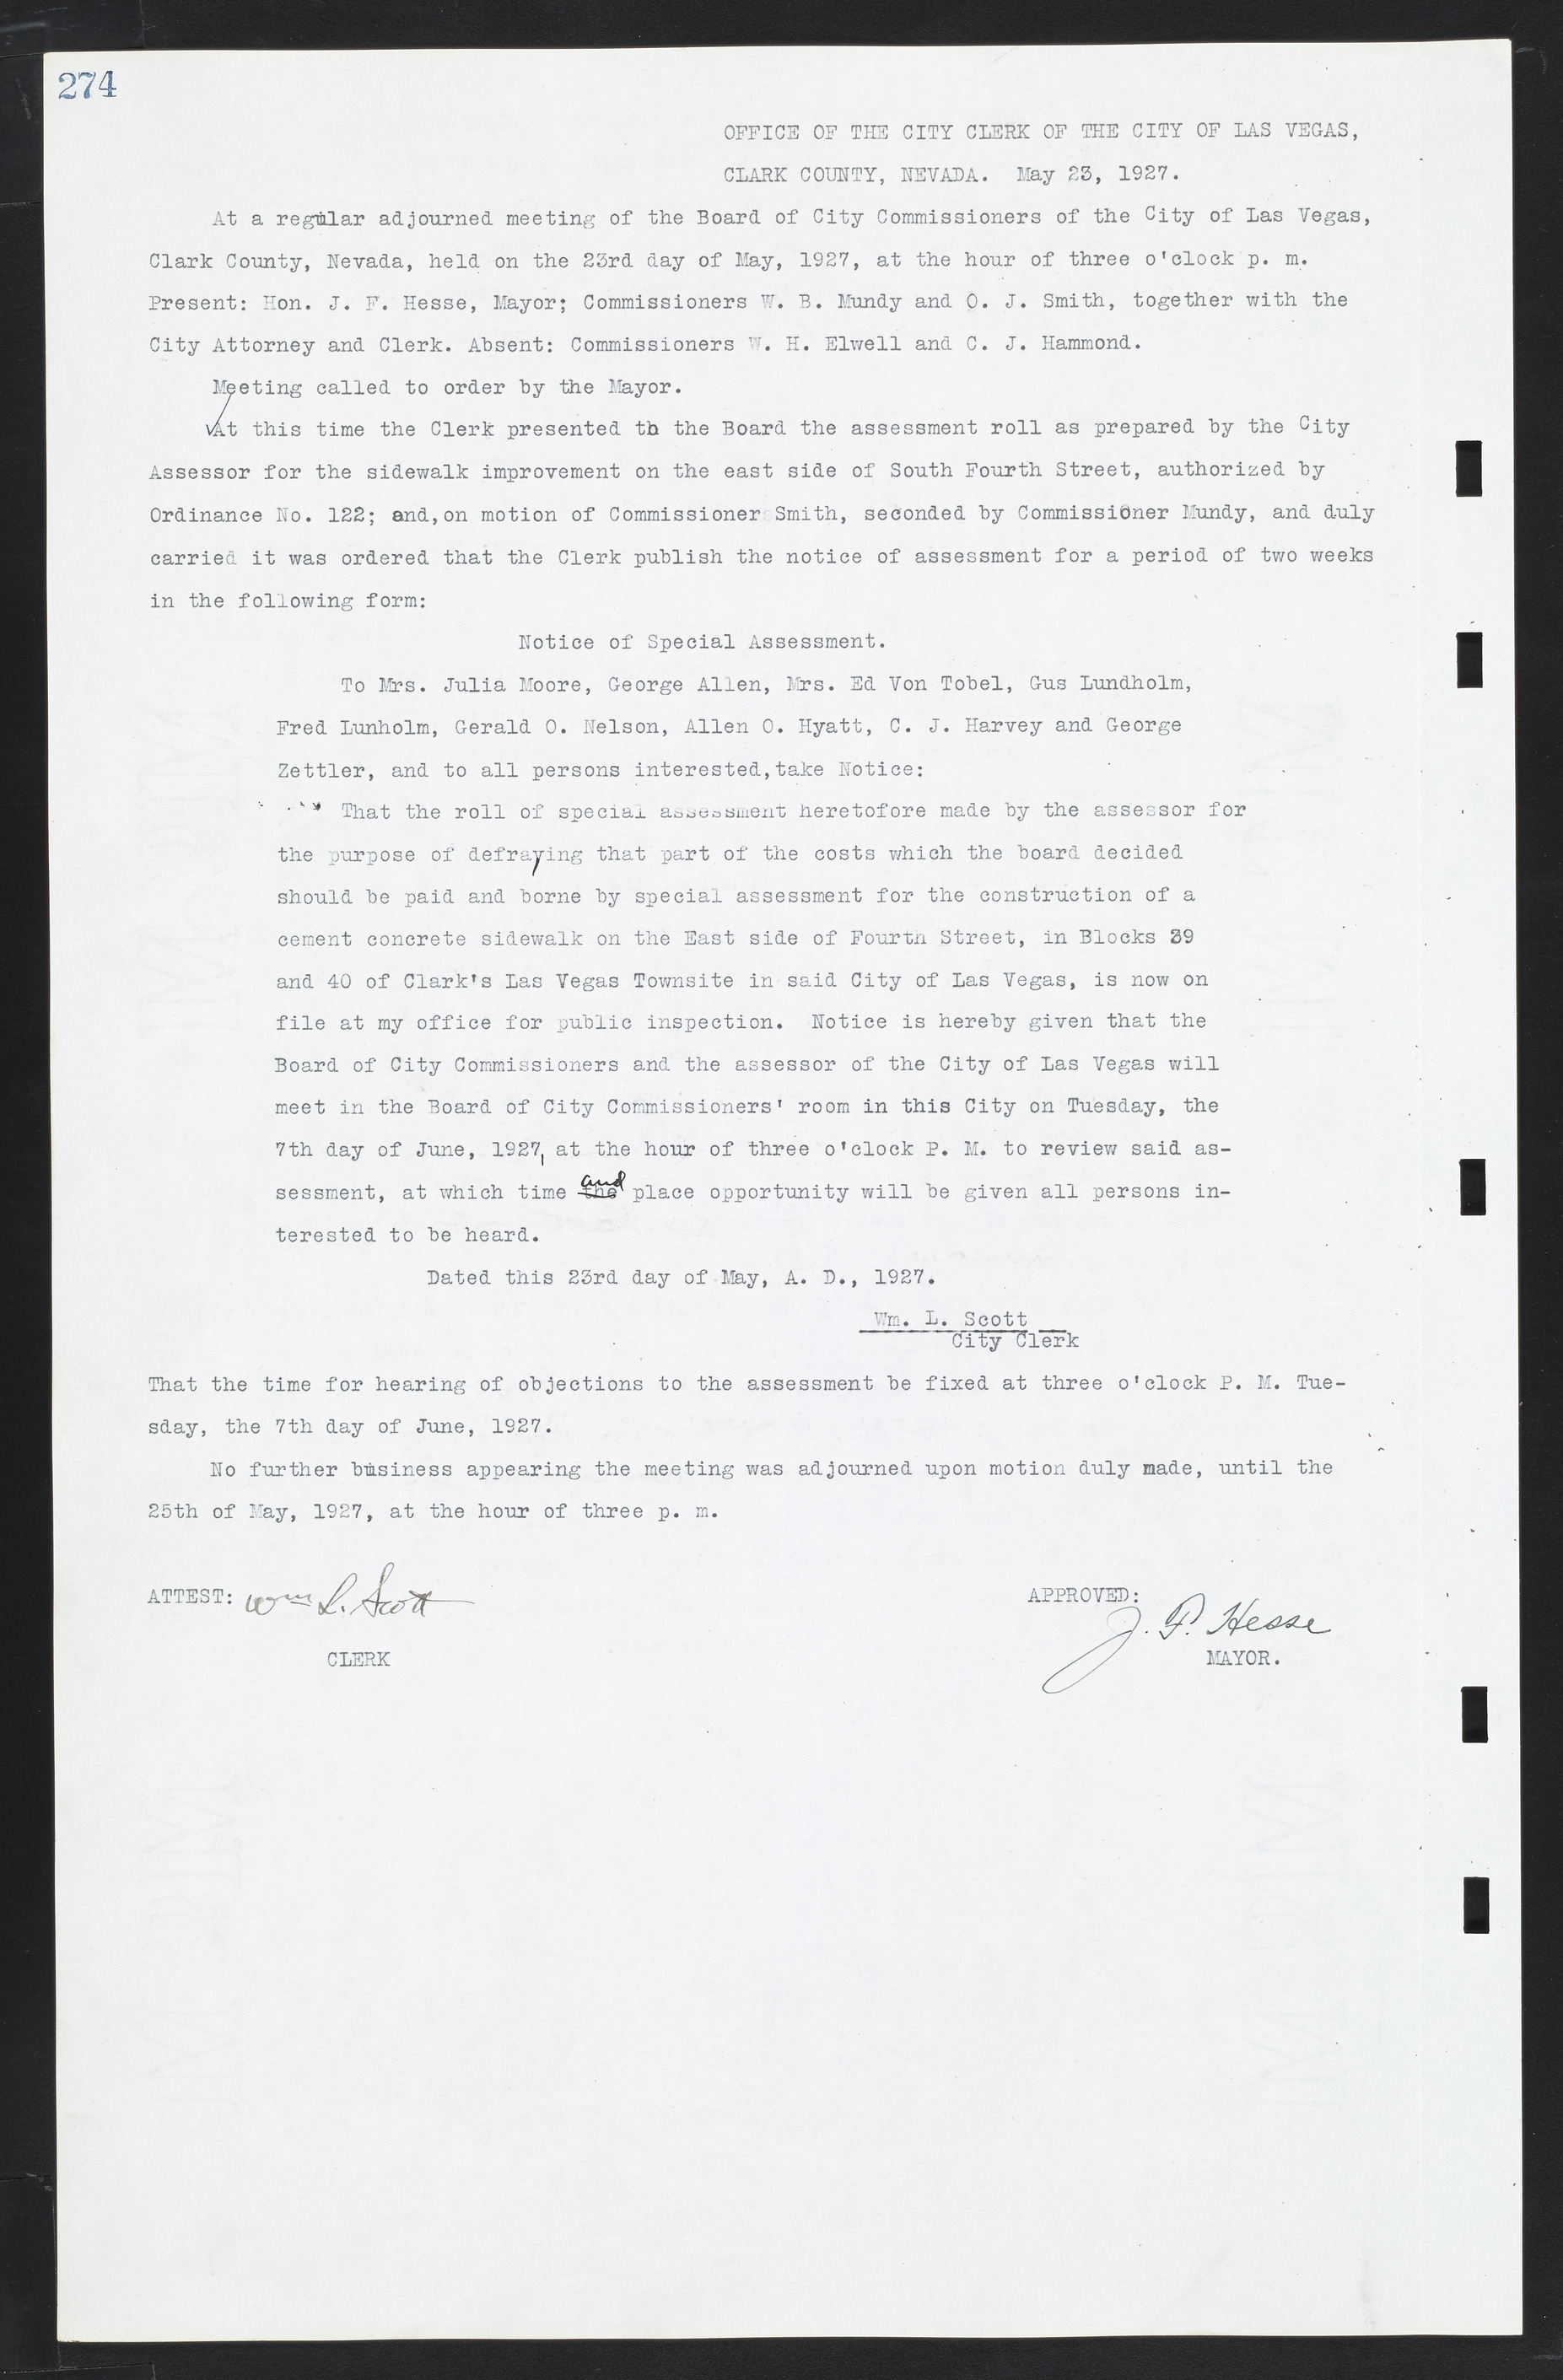 Las Vegas City Commission Minutes, March 1, 1922 to May 10, 1929, lvc000002-283